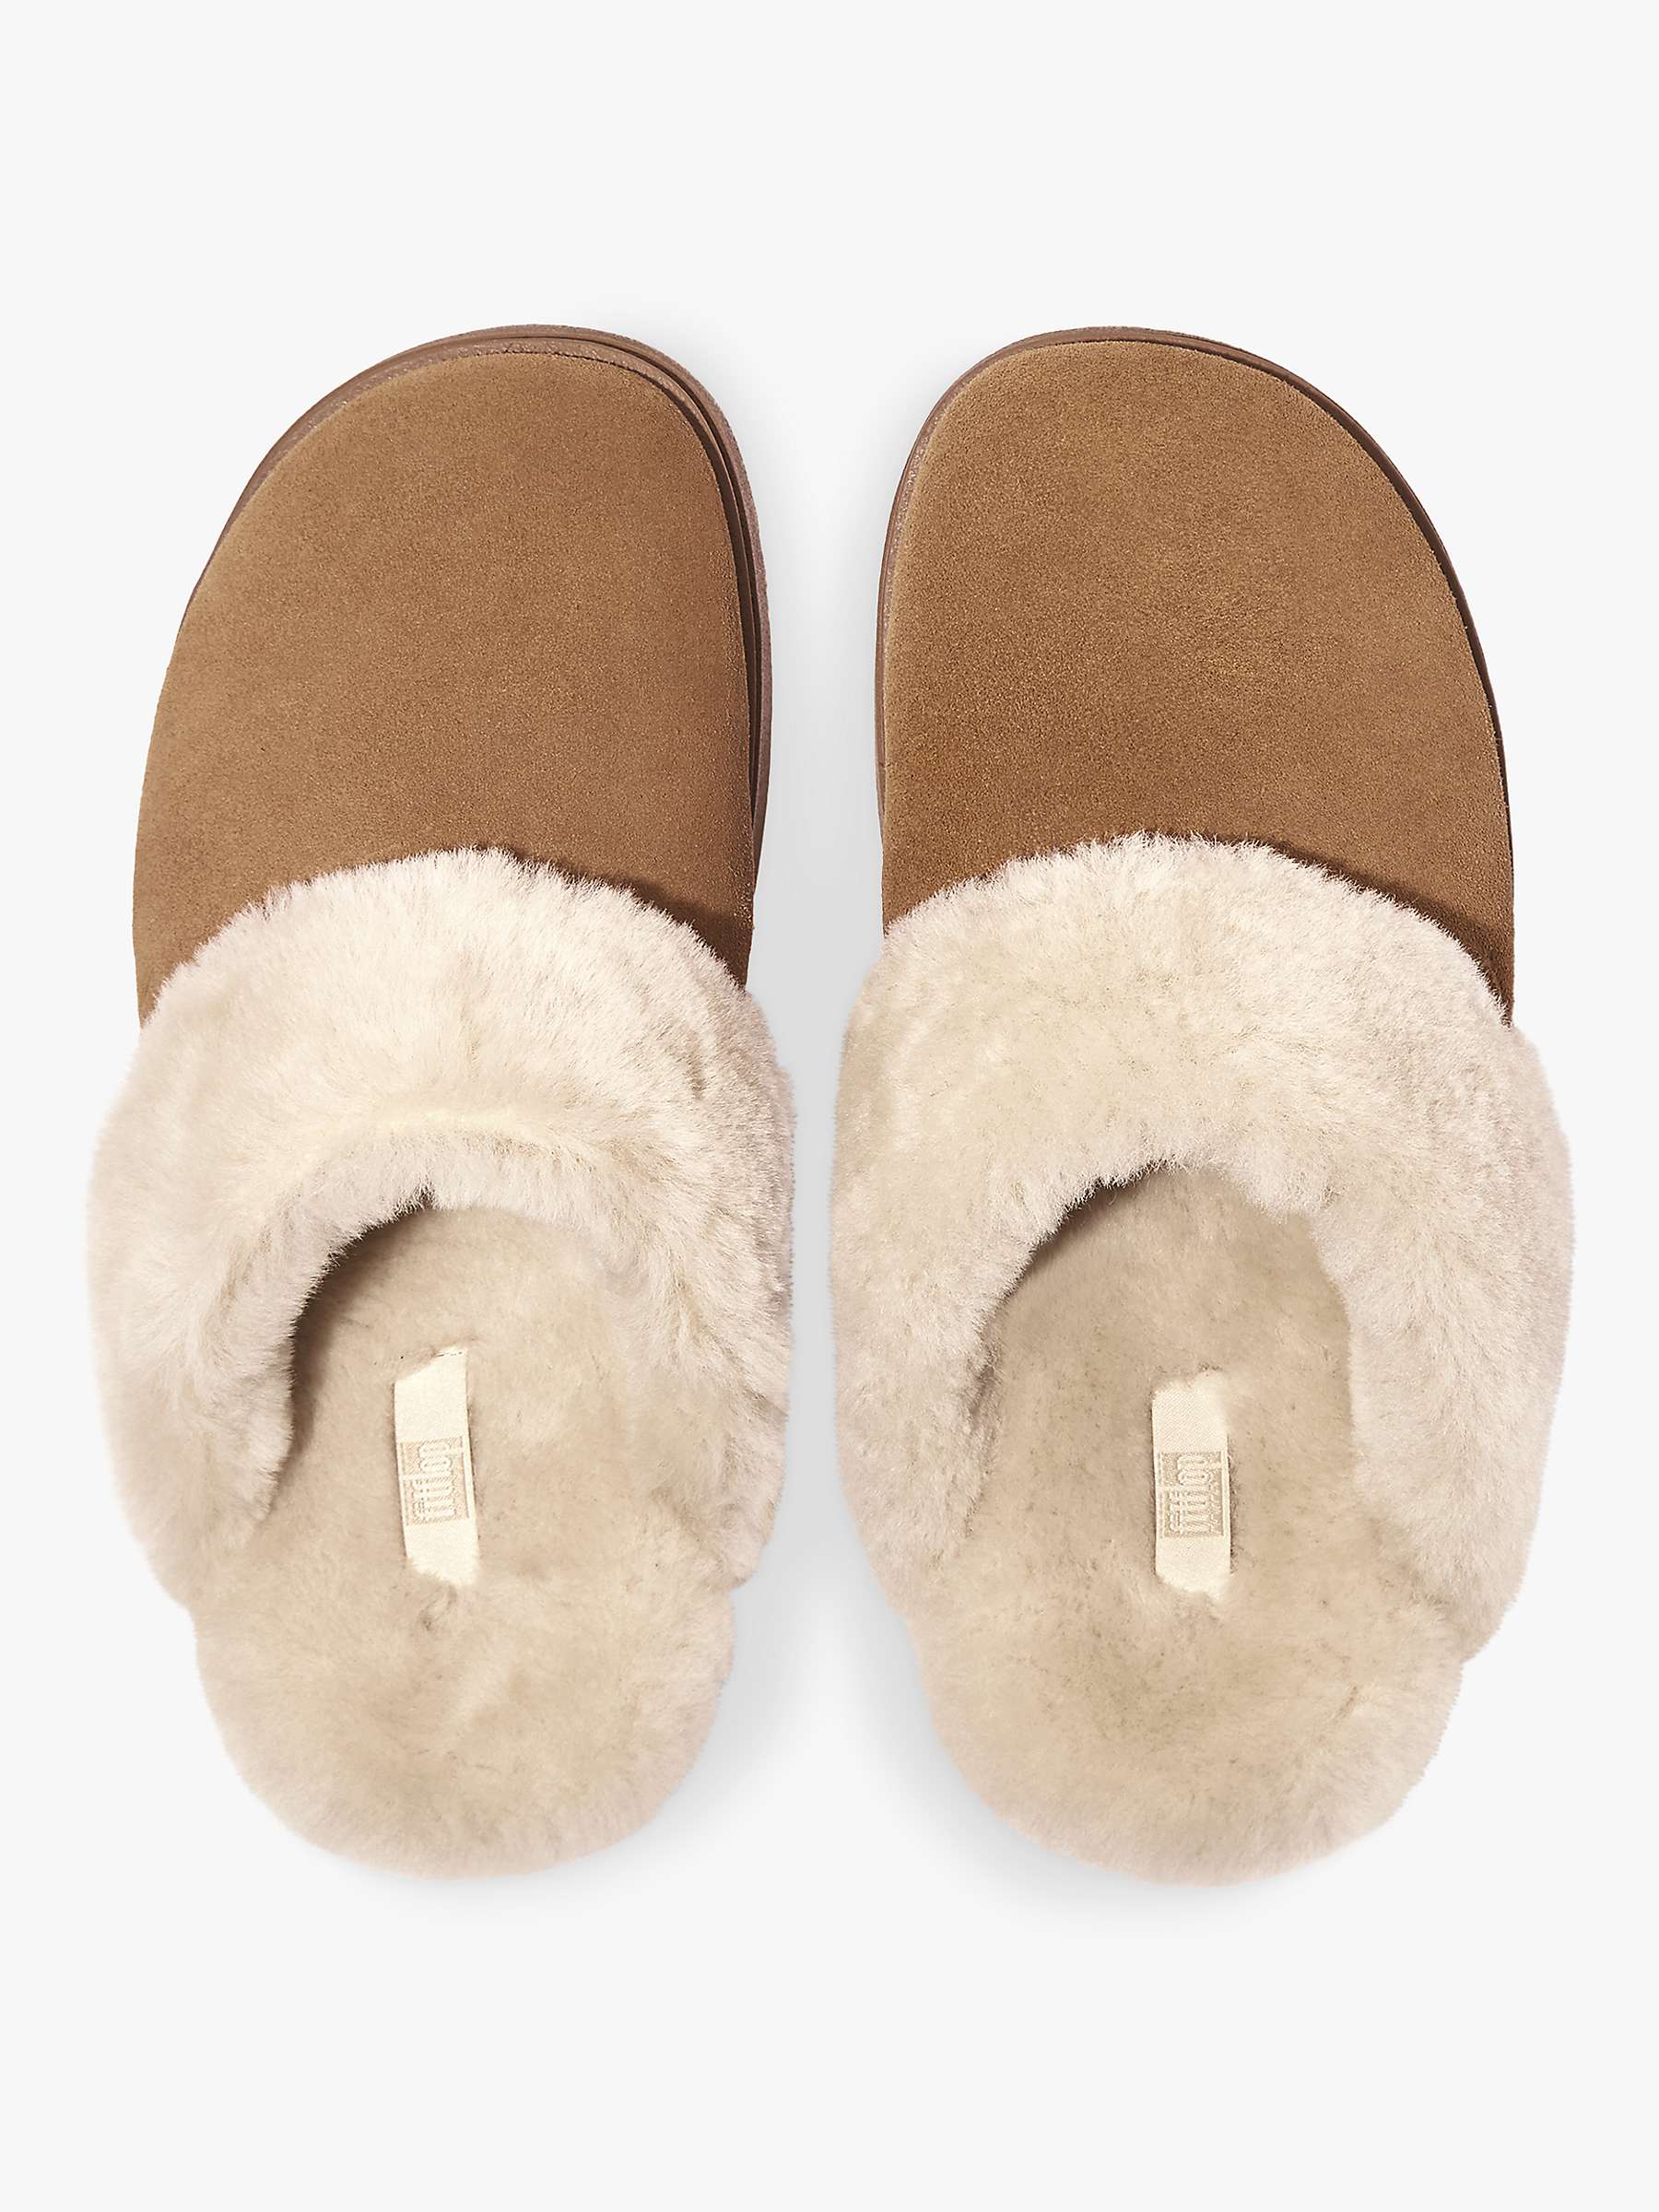 Buy FitFlop Shearling Collar Suede Mule Slippers, Desert Tan Online at johnlewis.com